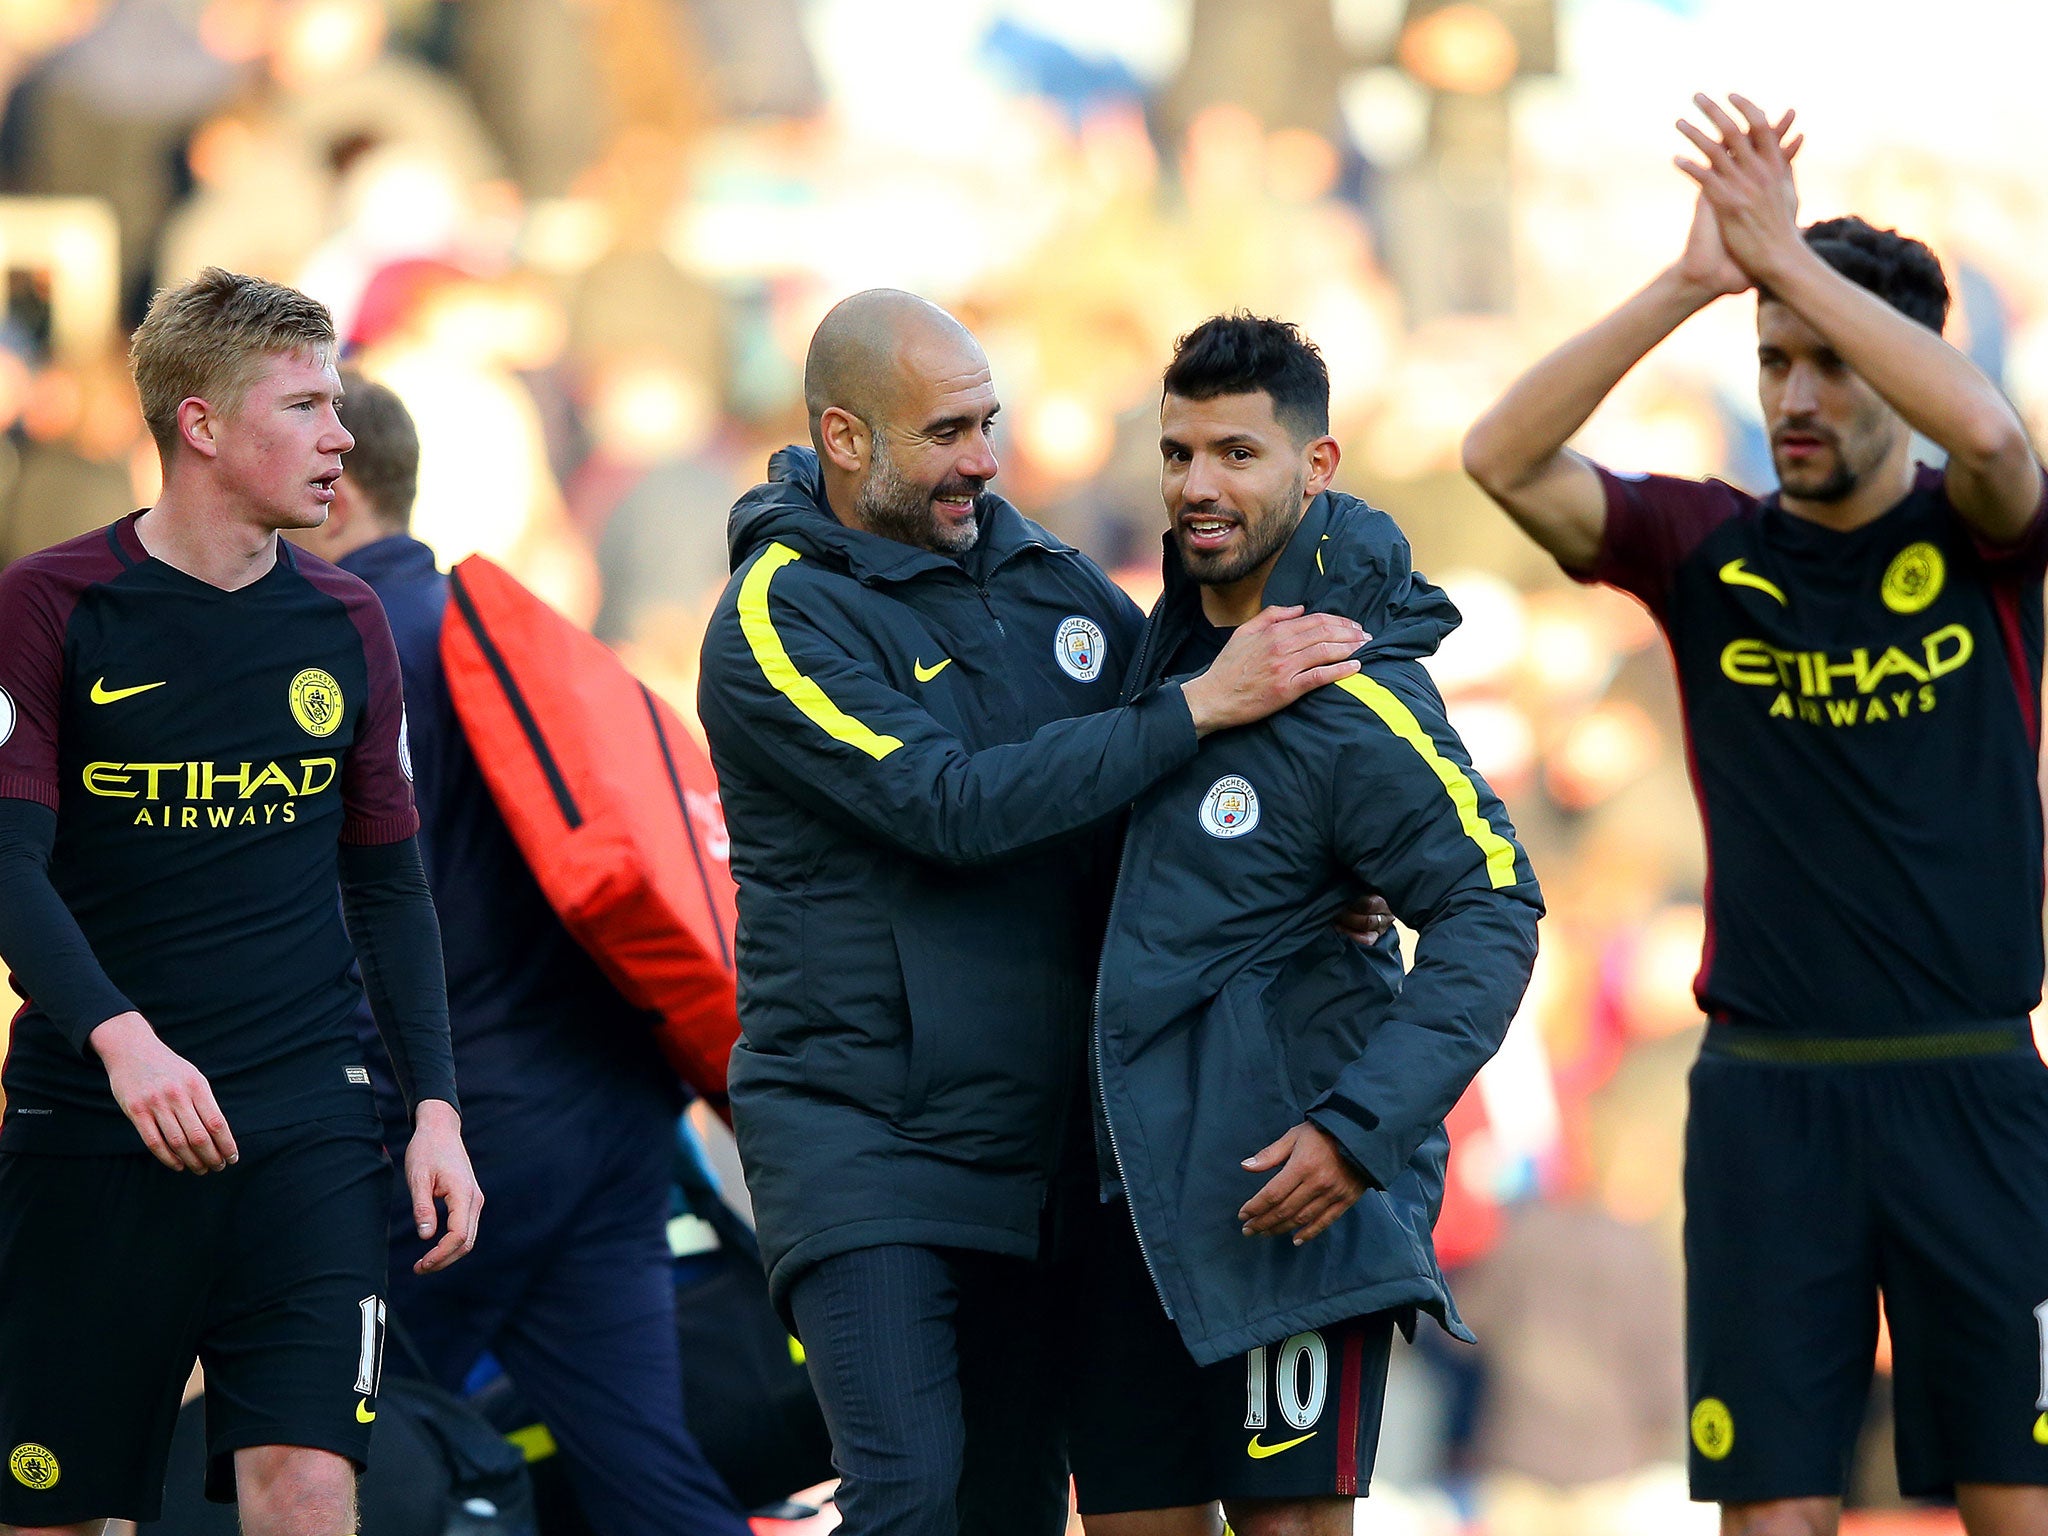 Pep Guardiola congratulates Sergio Aguero, who bagged a brace against Burnley, after the final whistle of Saturday's game